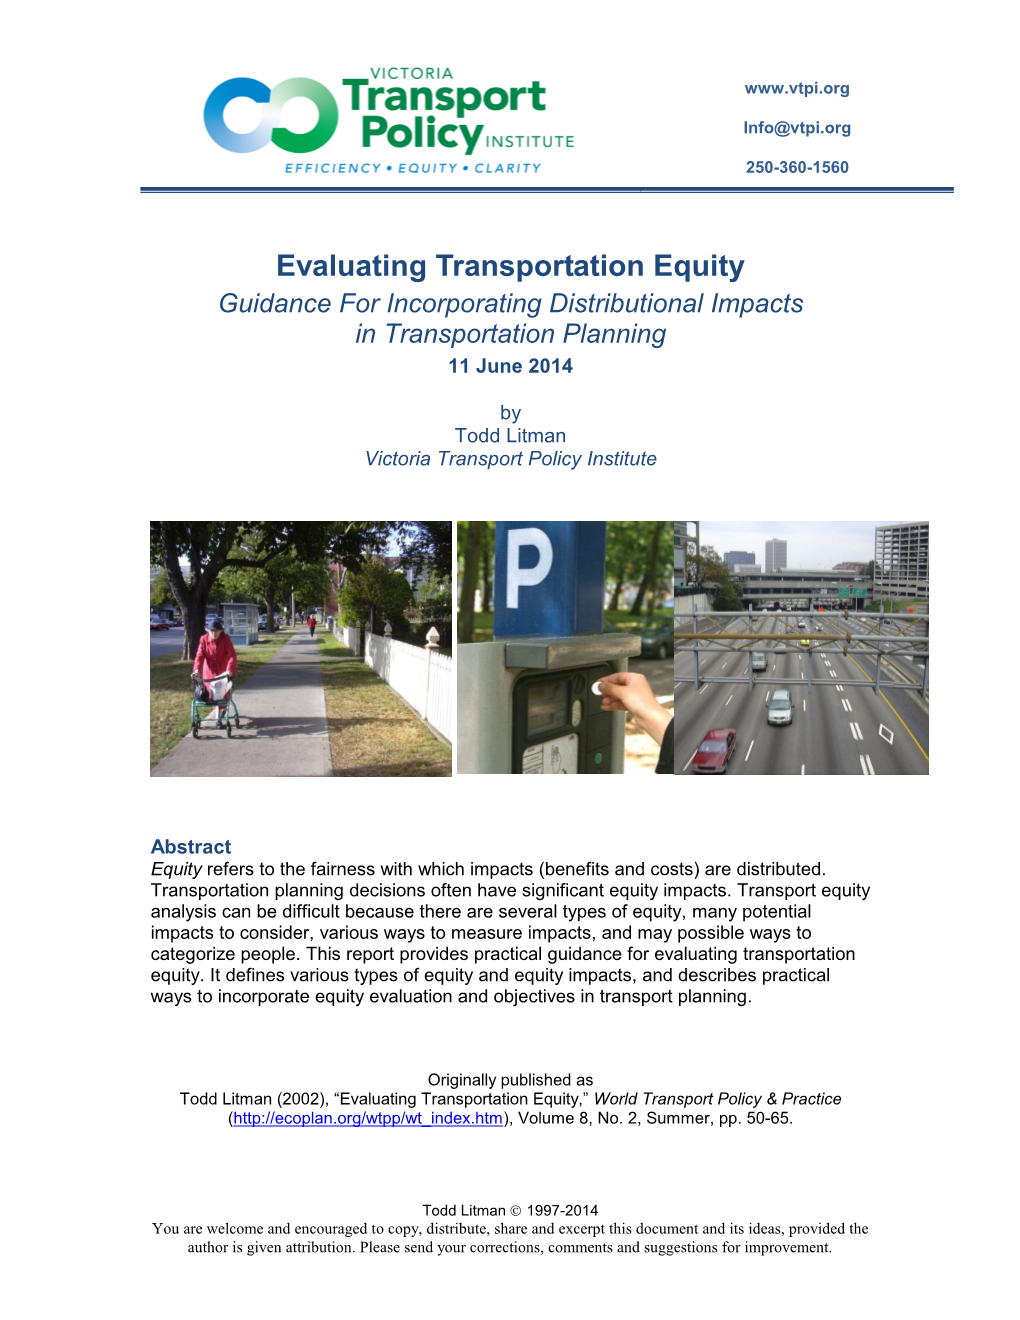 Evaluating Transportation Equity: Guidance for Incorporating